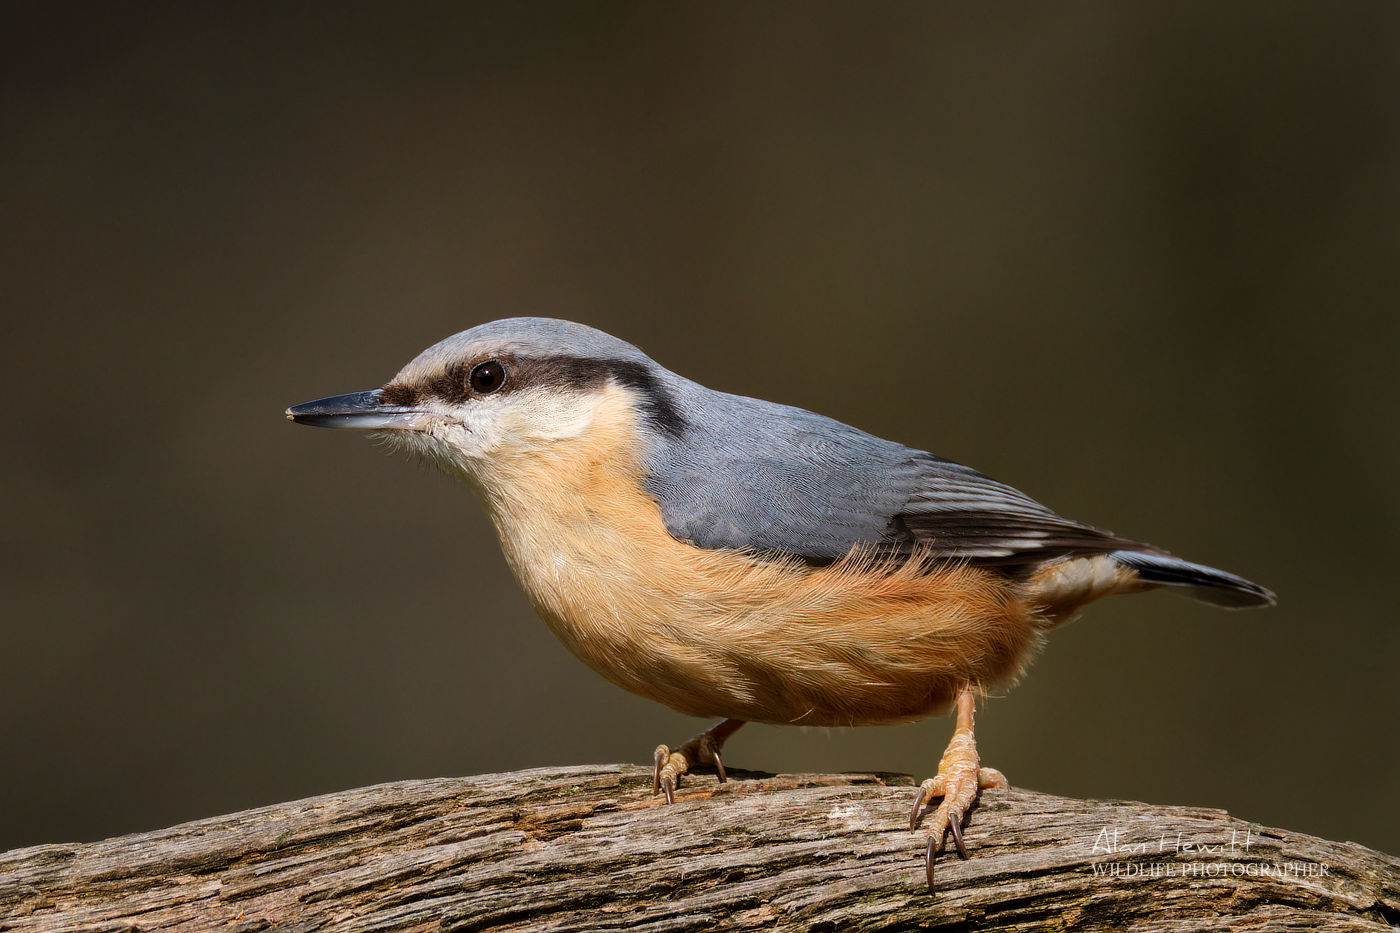 Nuthatch Fujifilm X-H2s and 150-600mm © Alan Hewitt Photography